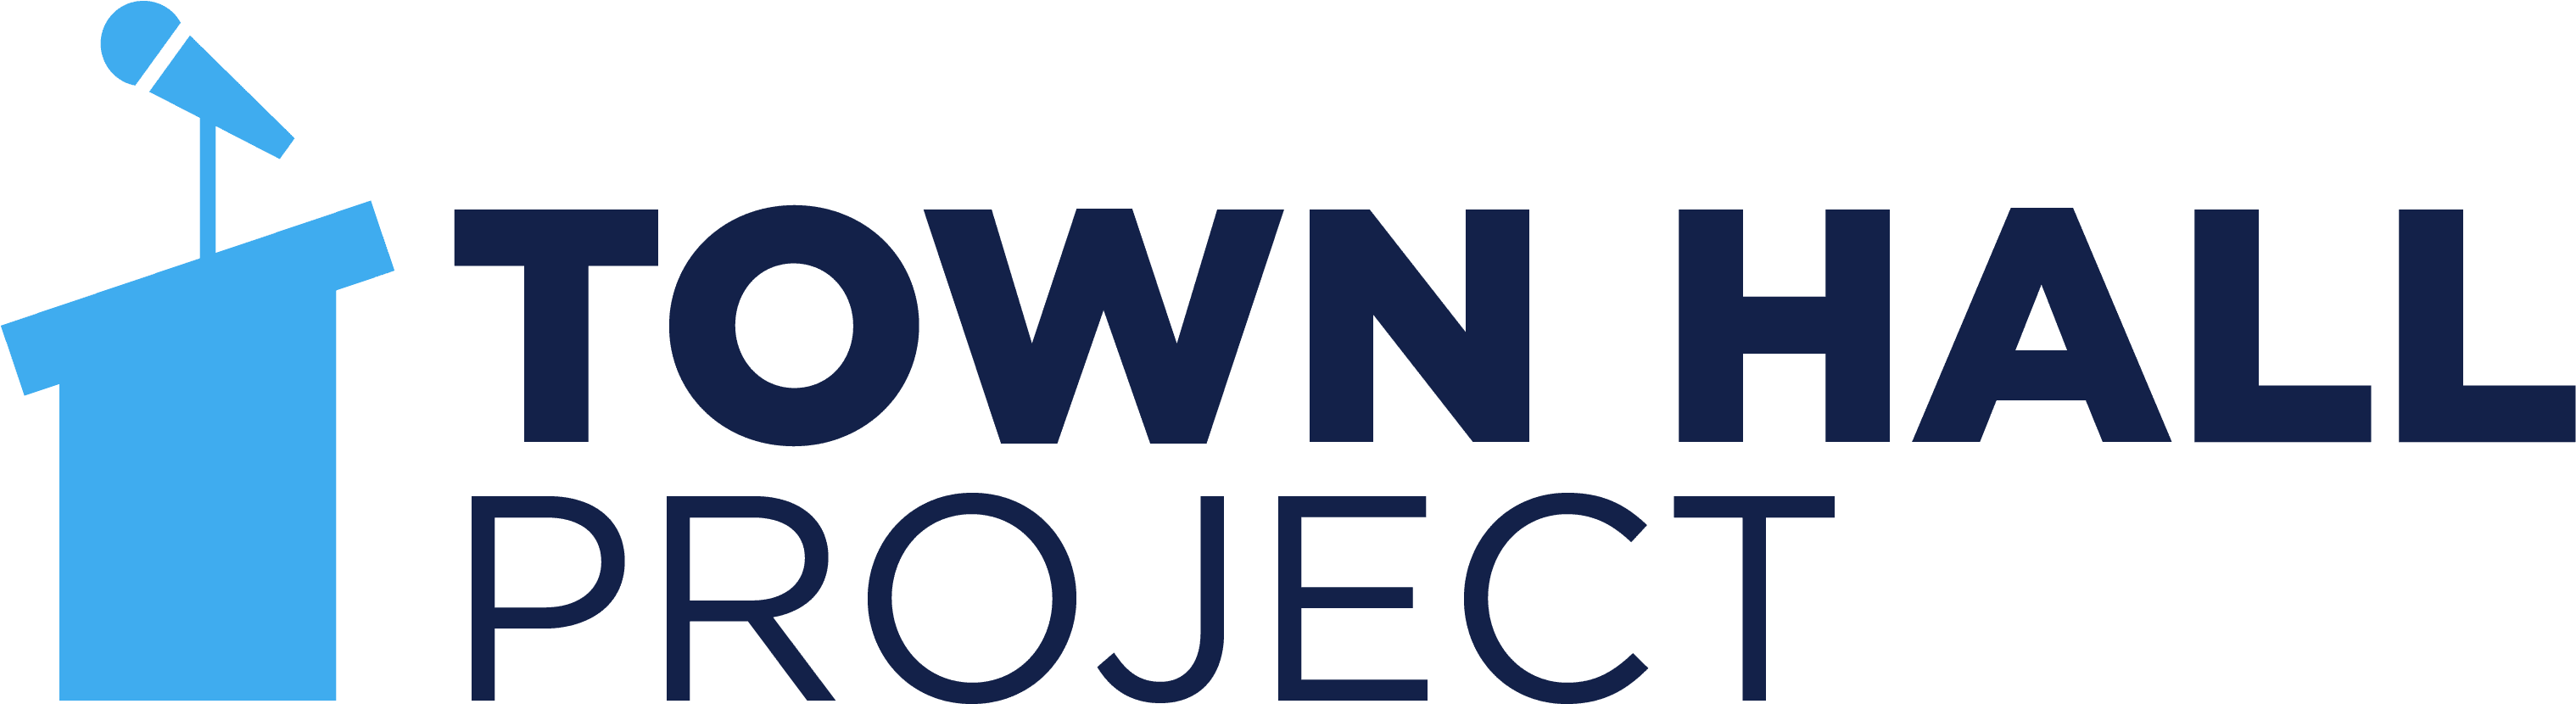 Town Hall Project Logo